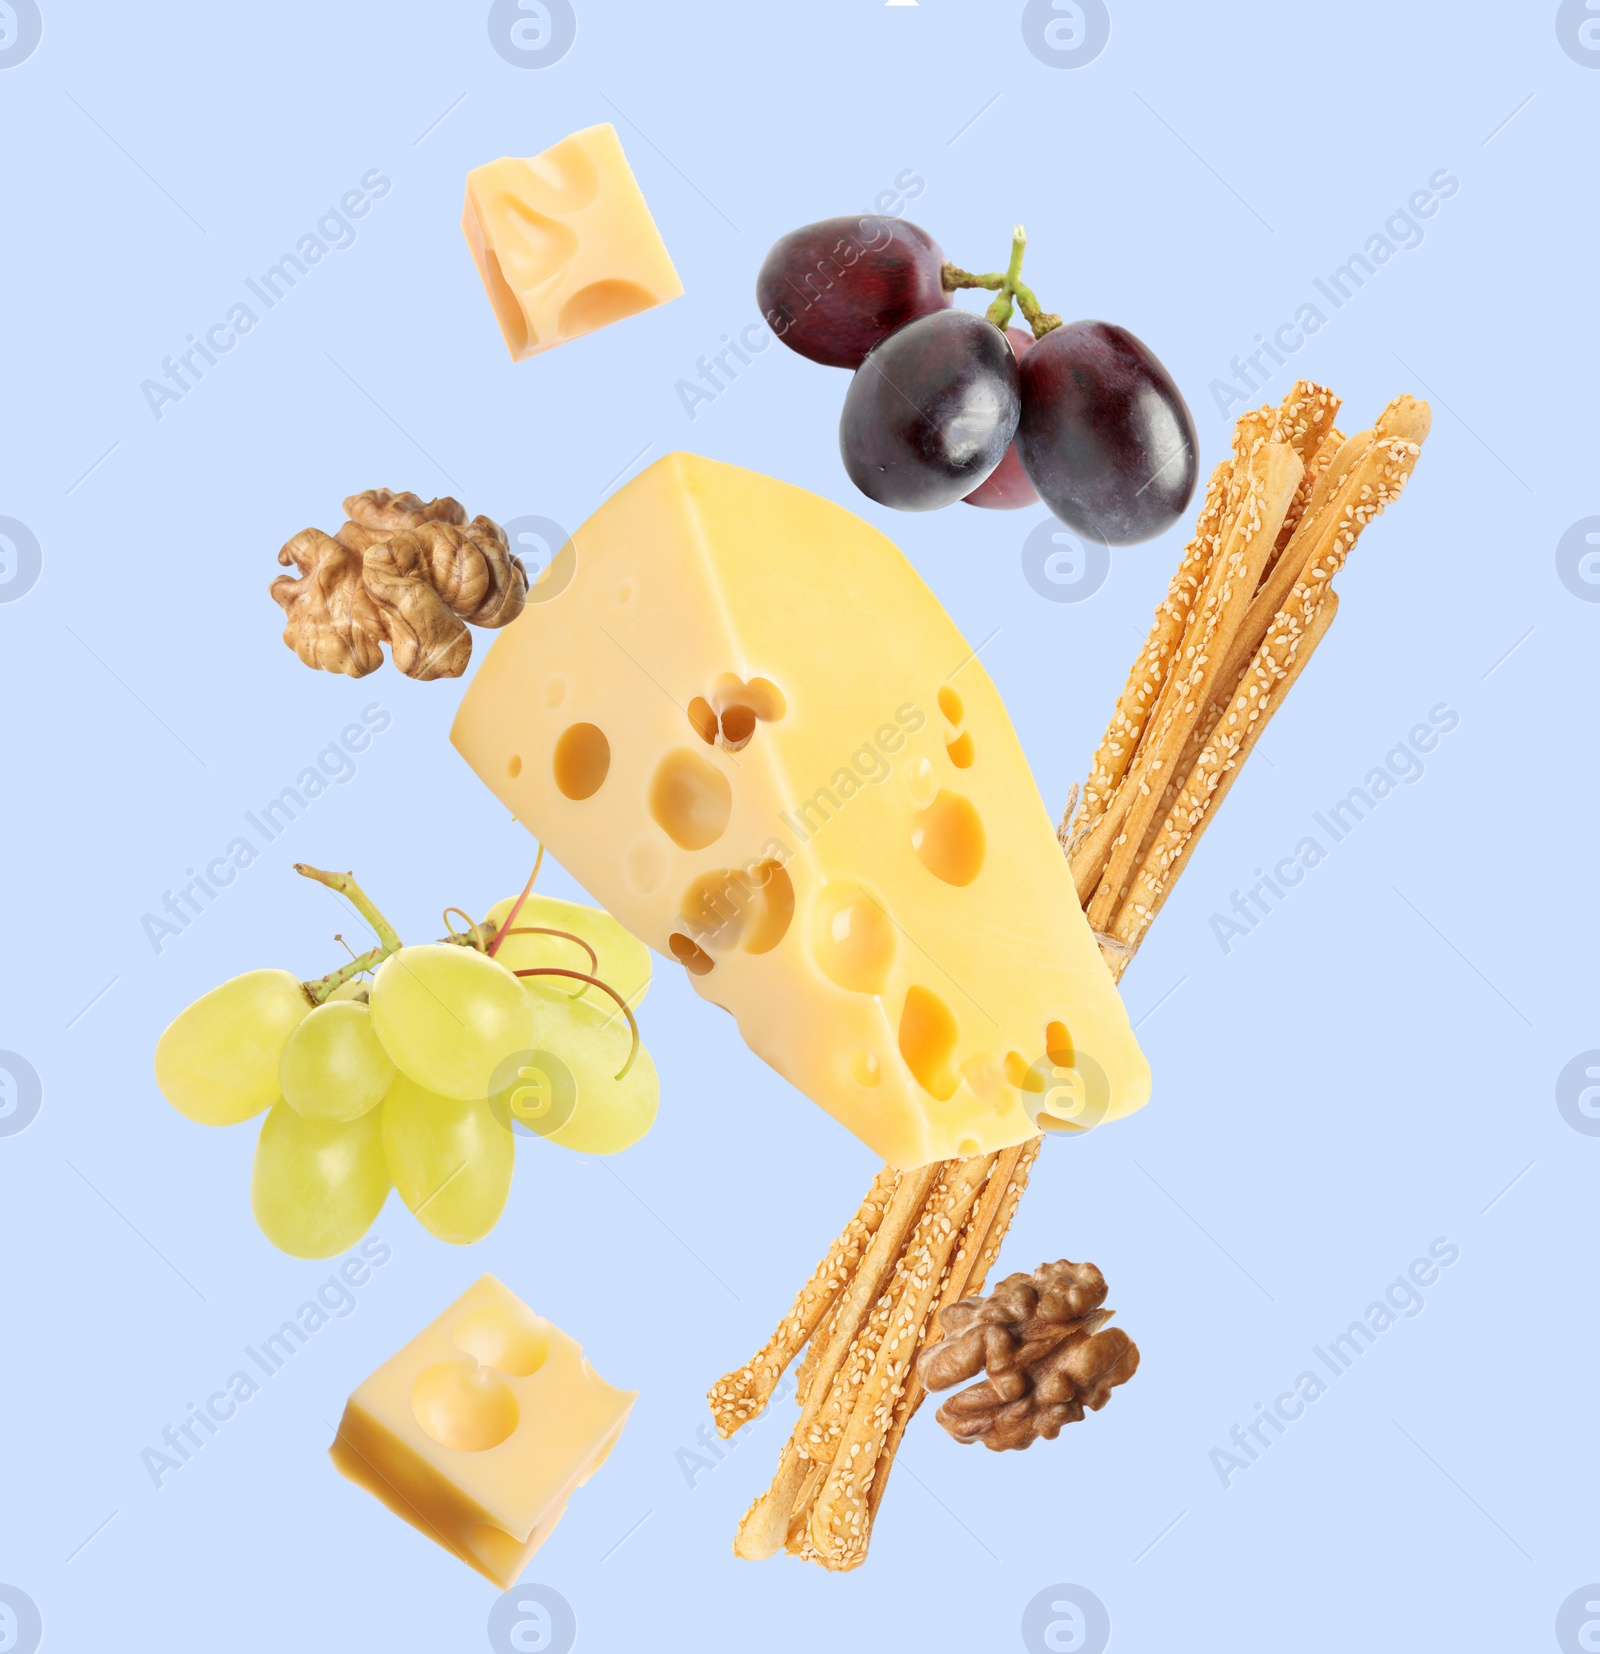 Image of Cheese, breadsticks, grapes and walnuts falling against pale light blue background